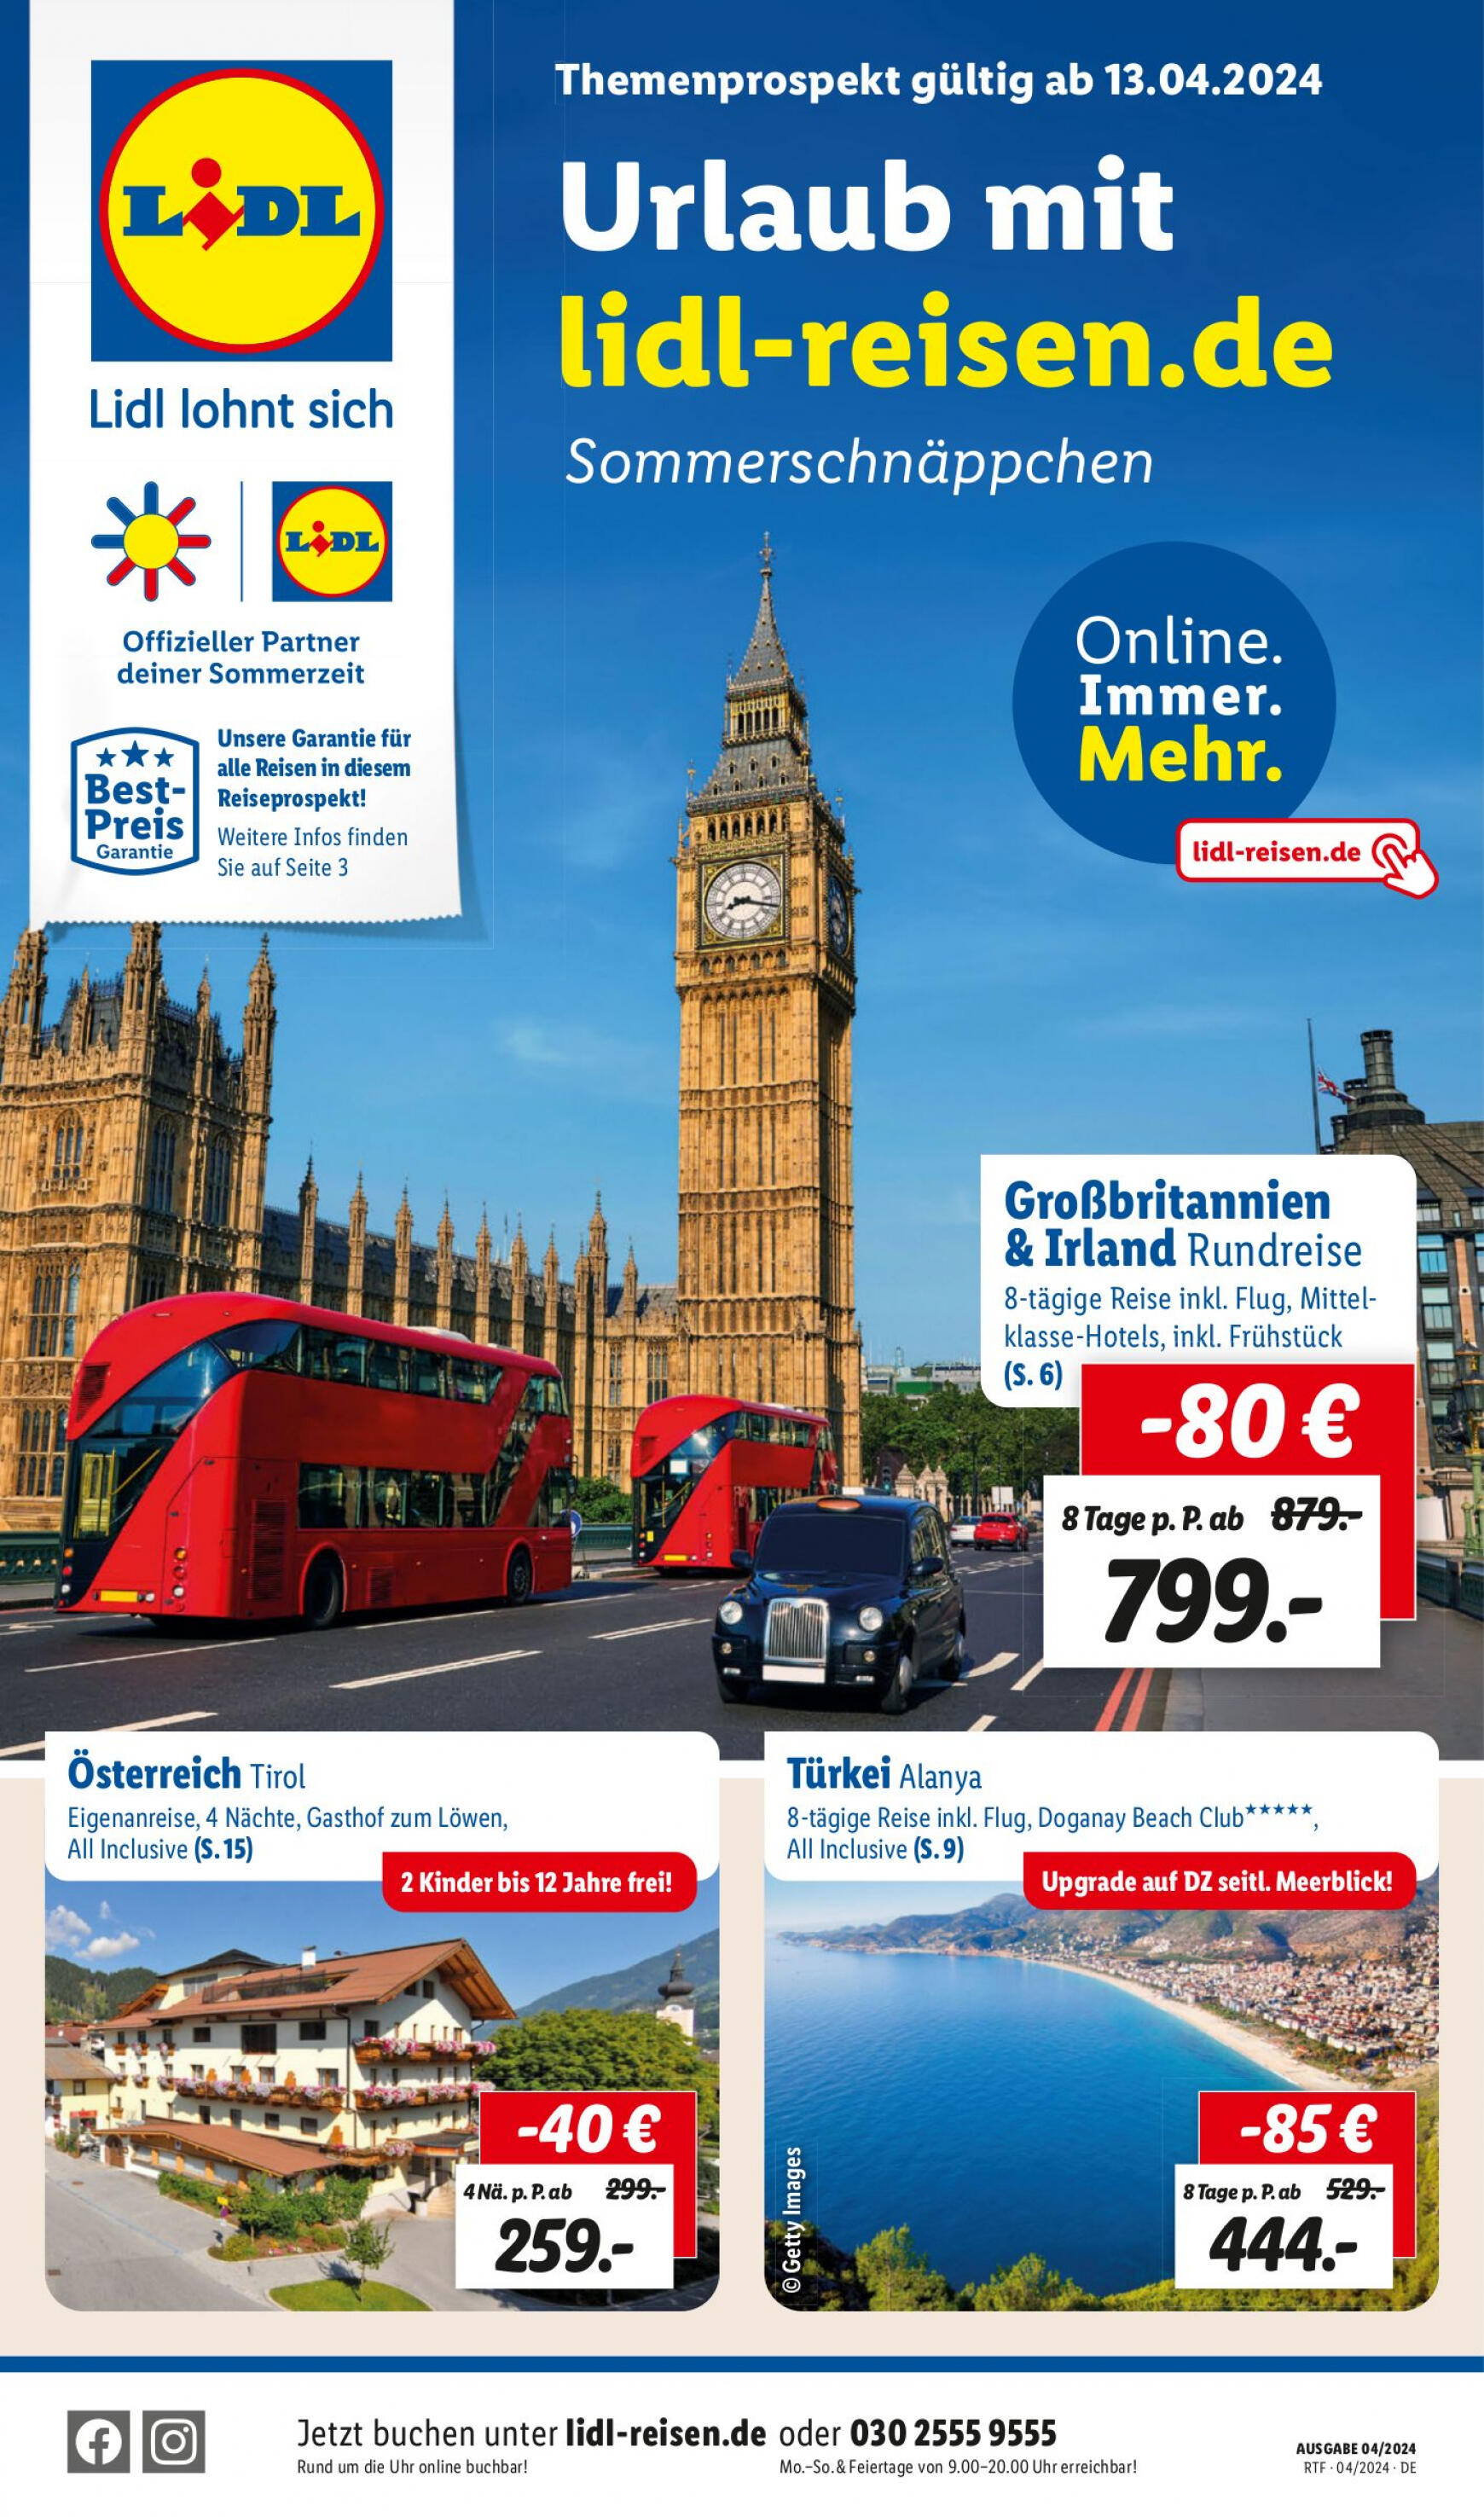 lidl - Flyer Lidl - Sommerschnäppchen aktuell 13.04. - 15.05. - page: 1